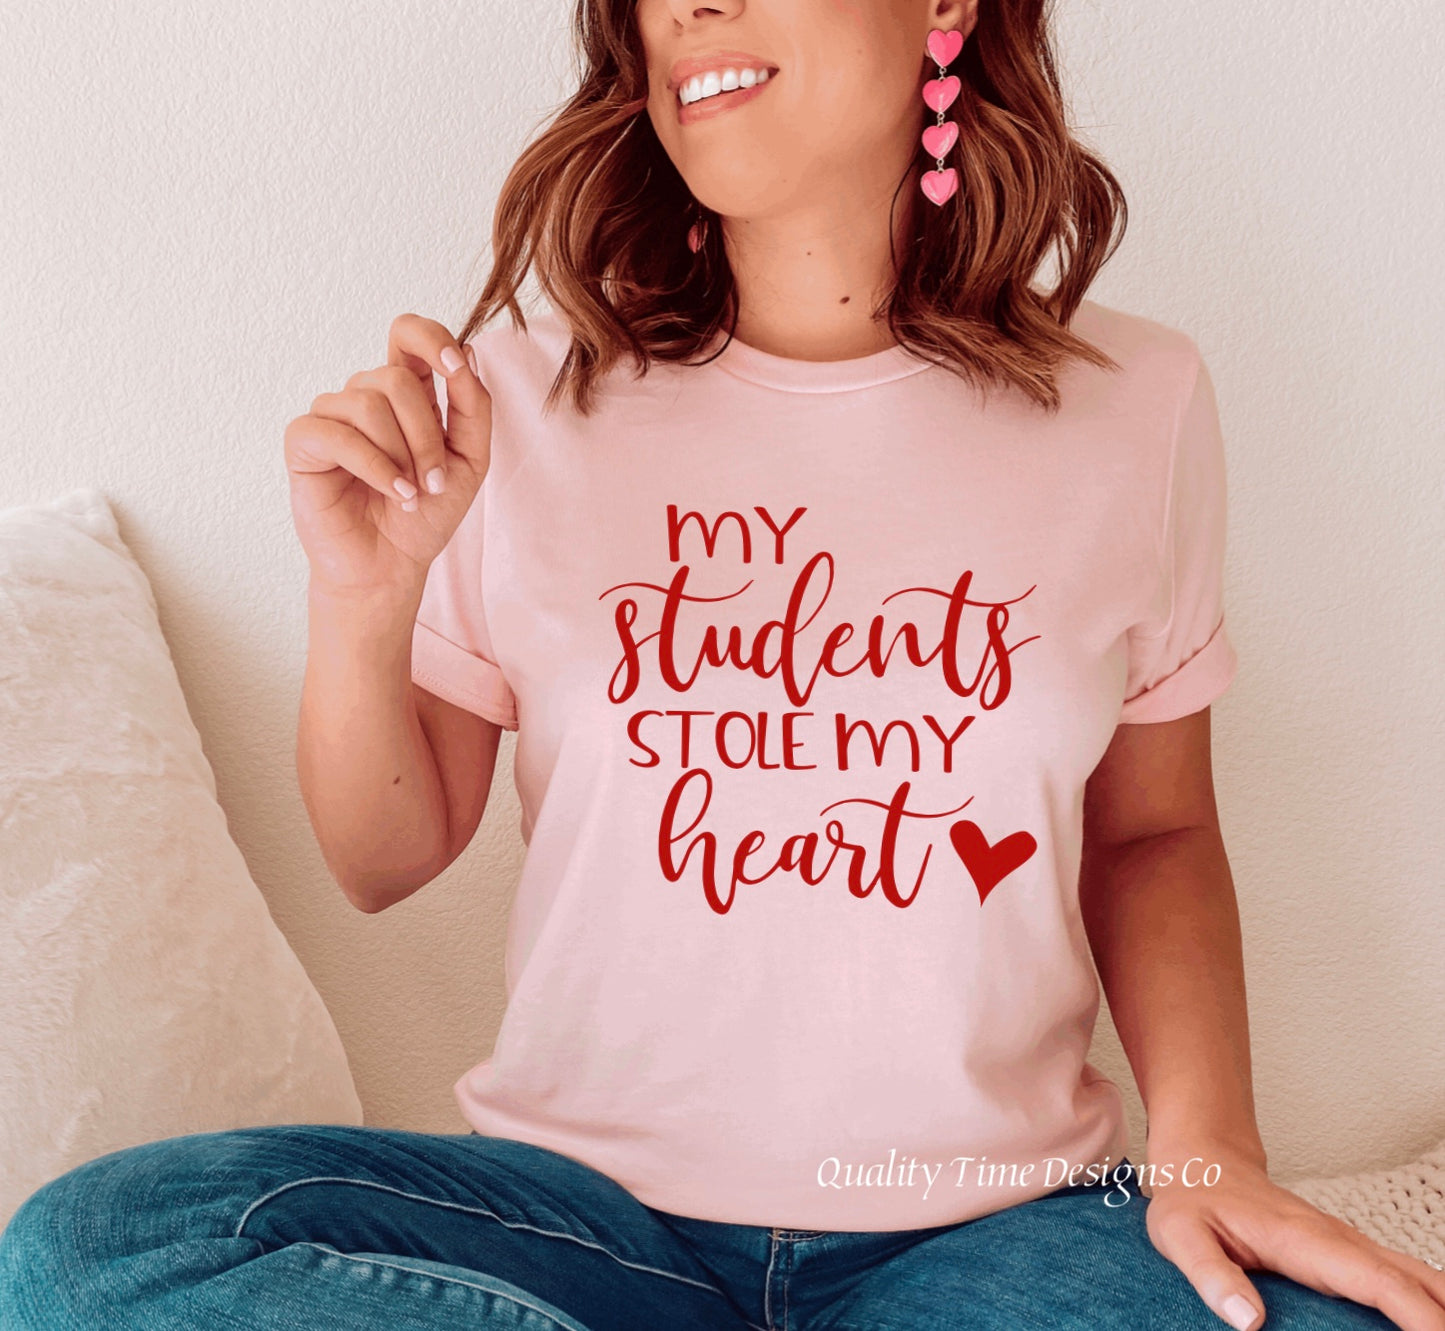 My students stole my heart t-shirt 